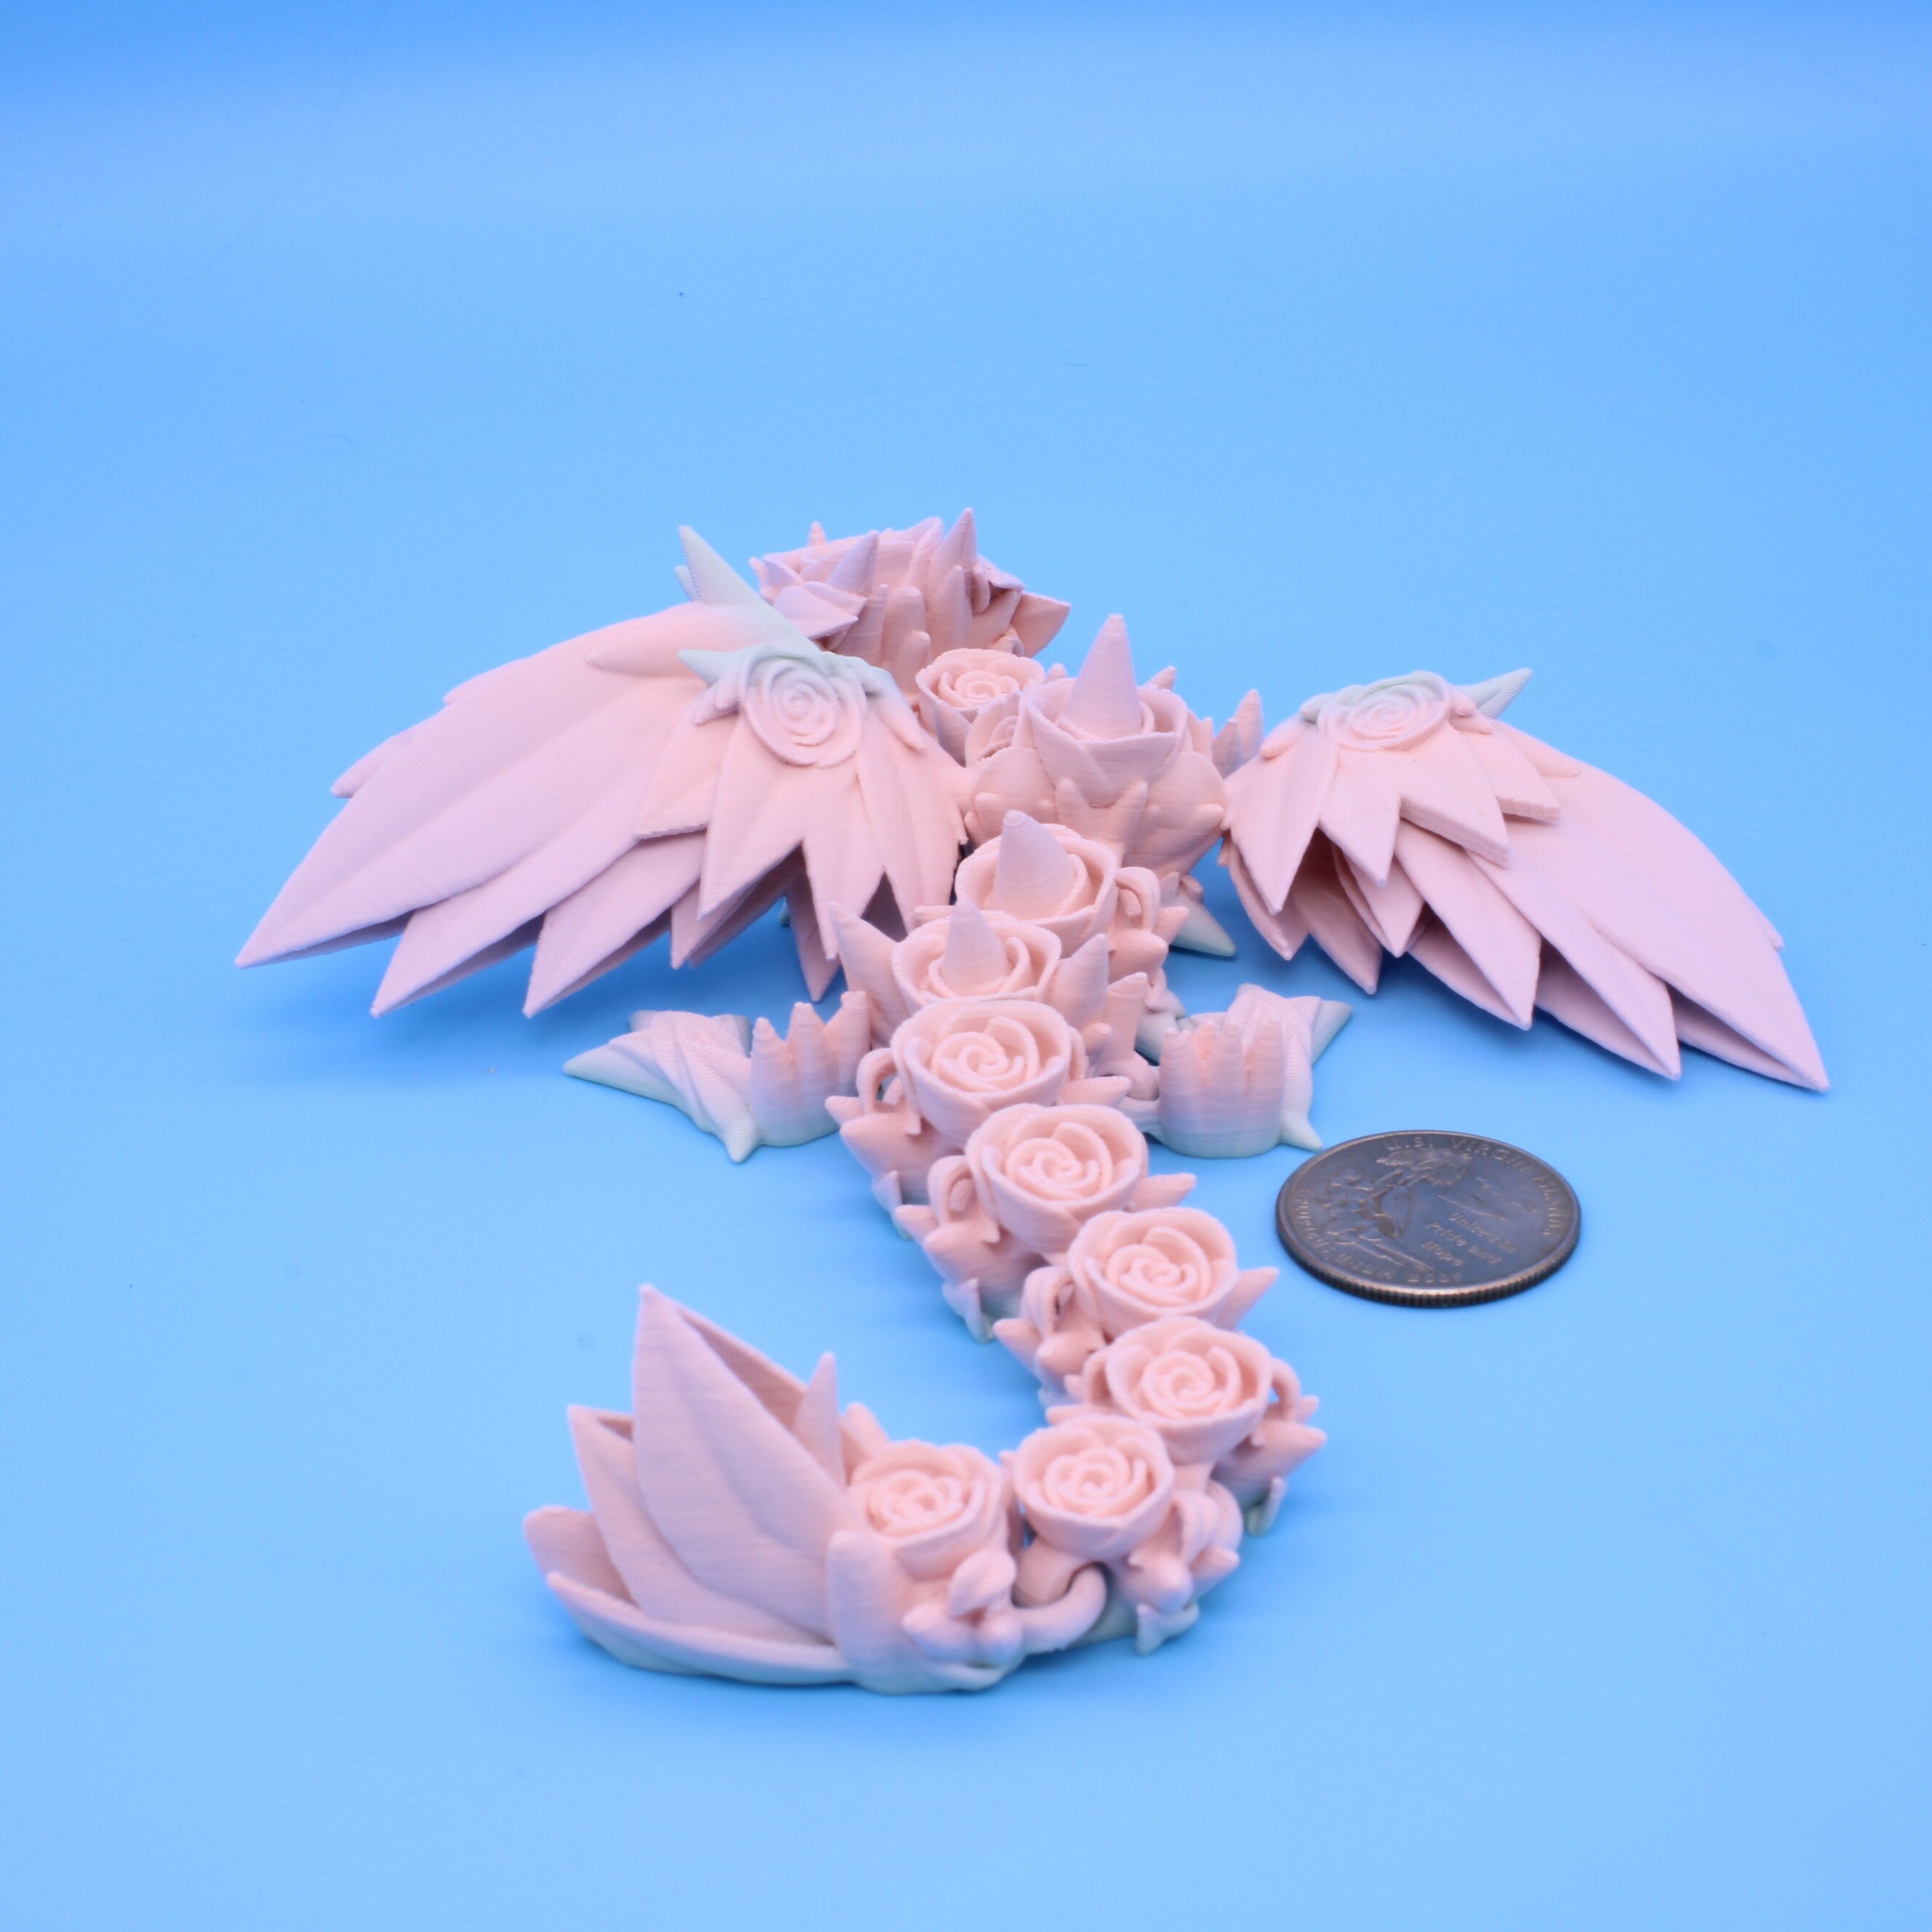 Baby Rose Wing Dragon | 3D Printed | Flexi Toy 8.5 in.